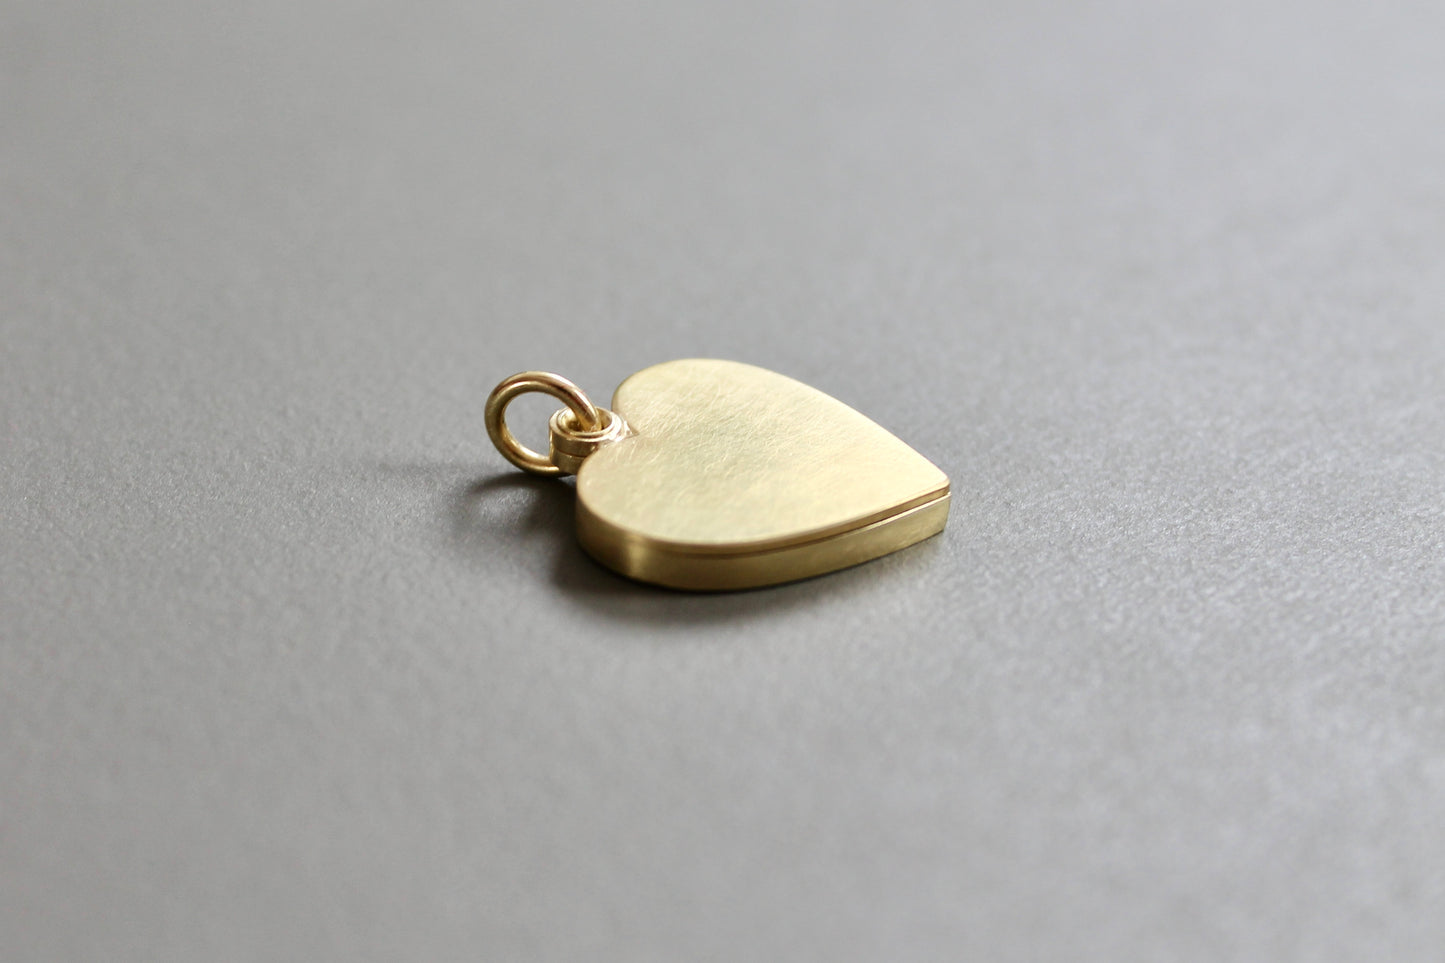 romantic heart locket for one photo in 18ct gold